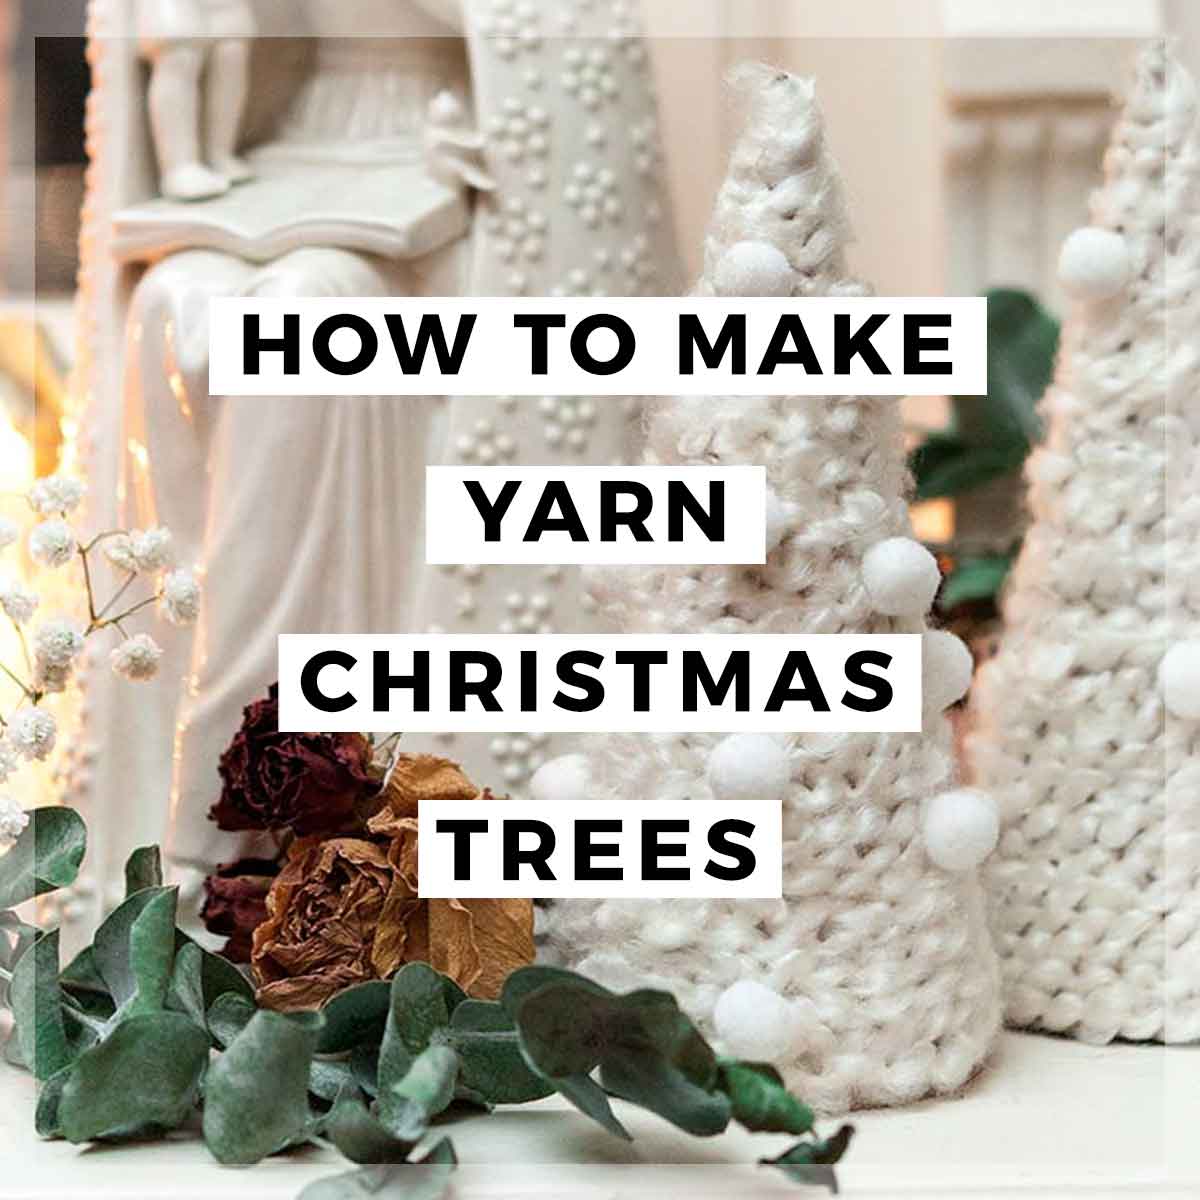 Christmas decorations on a mantle with a title that says "How to Make Yarn Christmas Trees